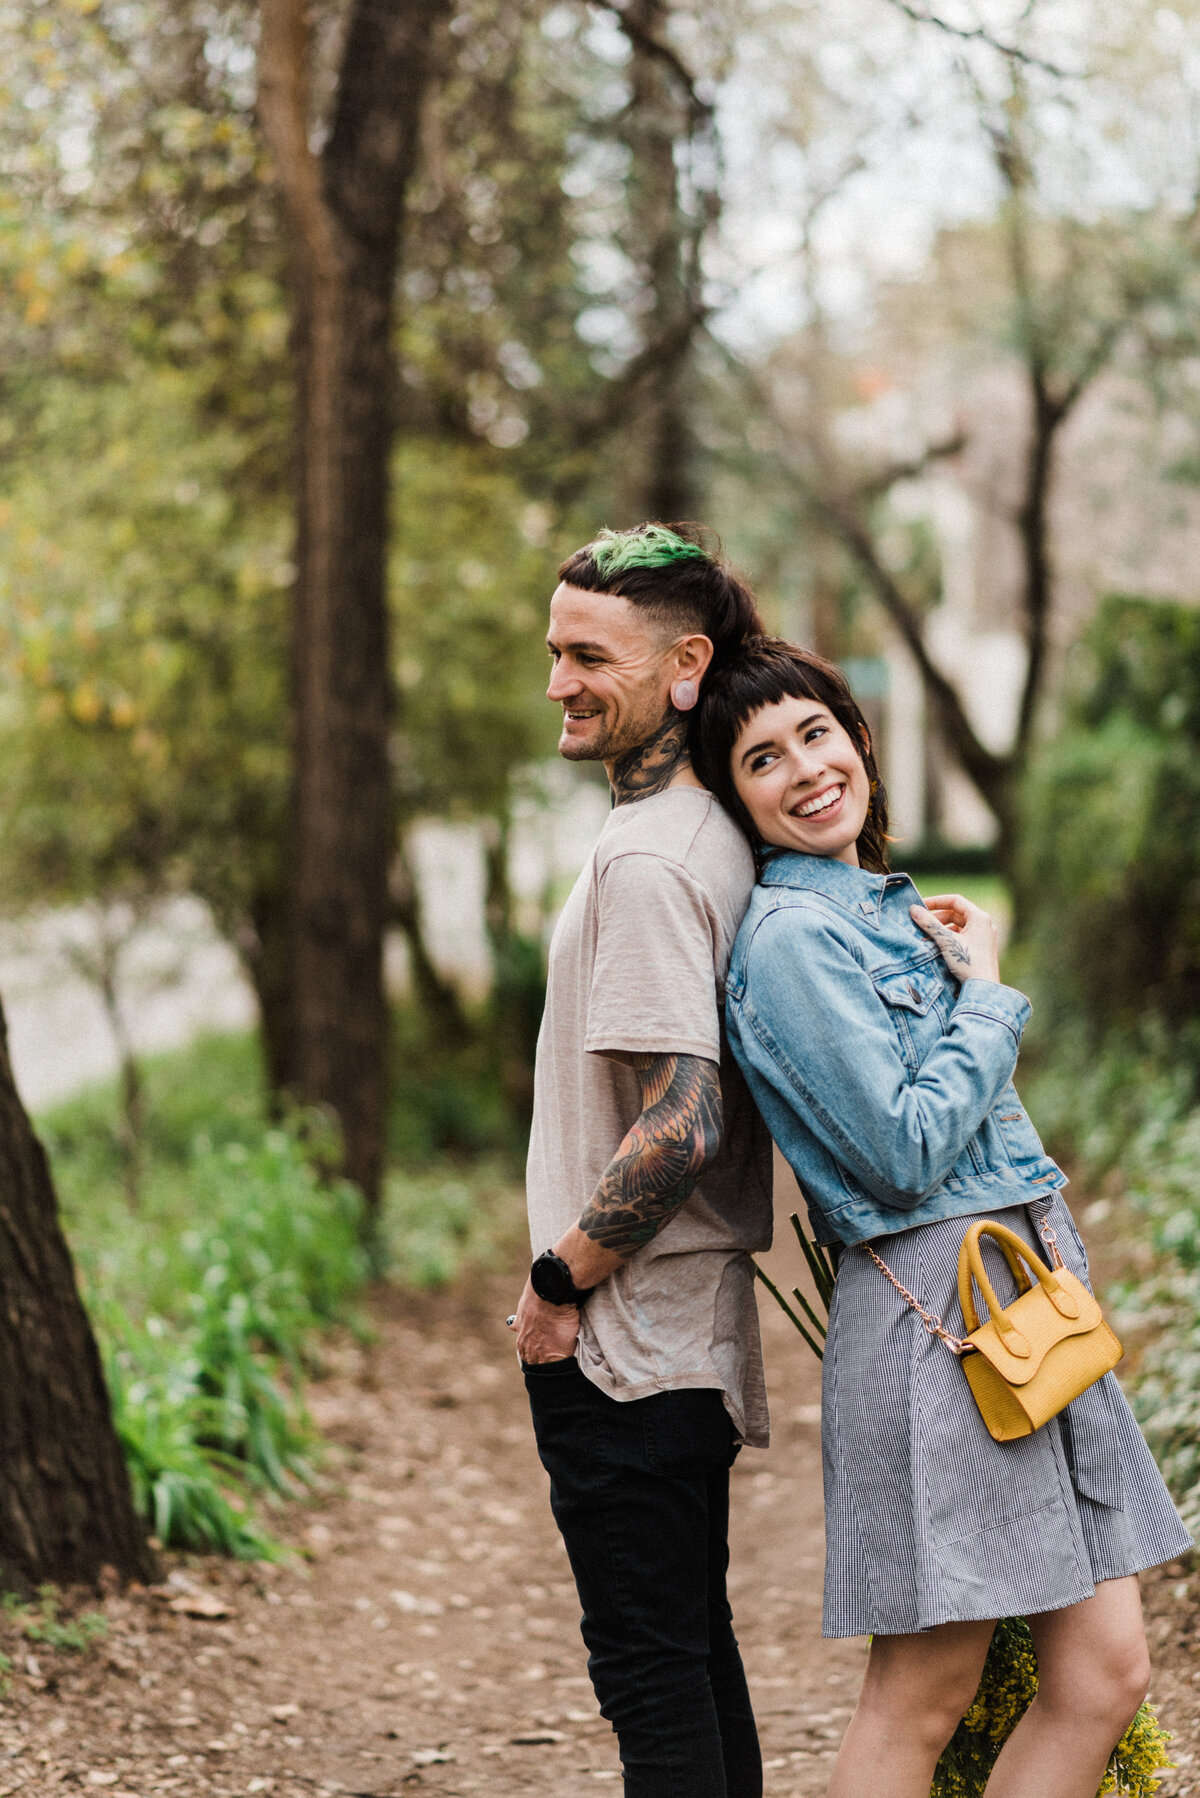 Downtown Guadalupe Austin Engagement Session 4